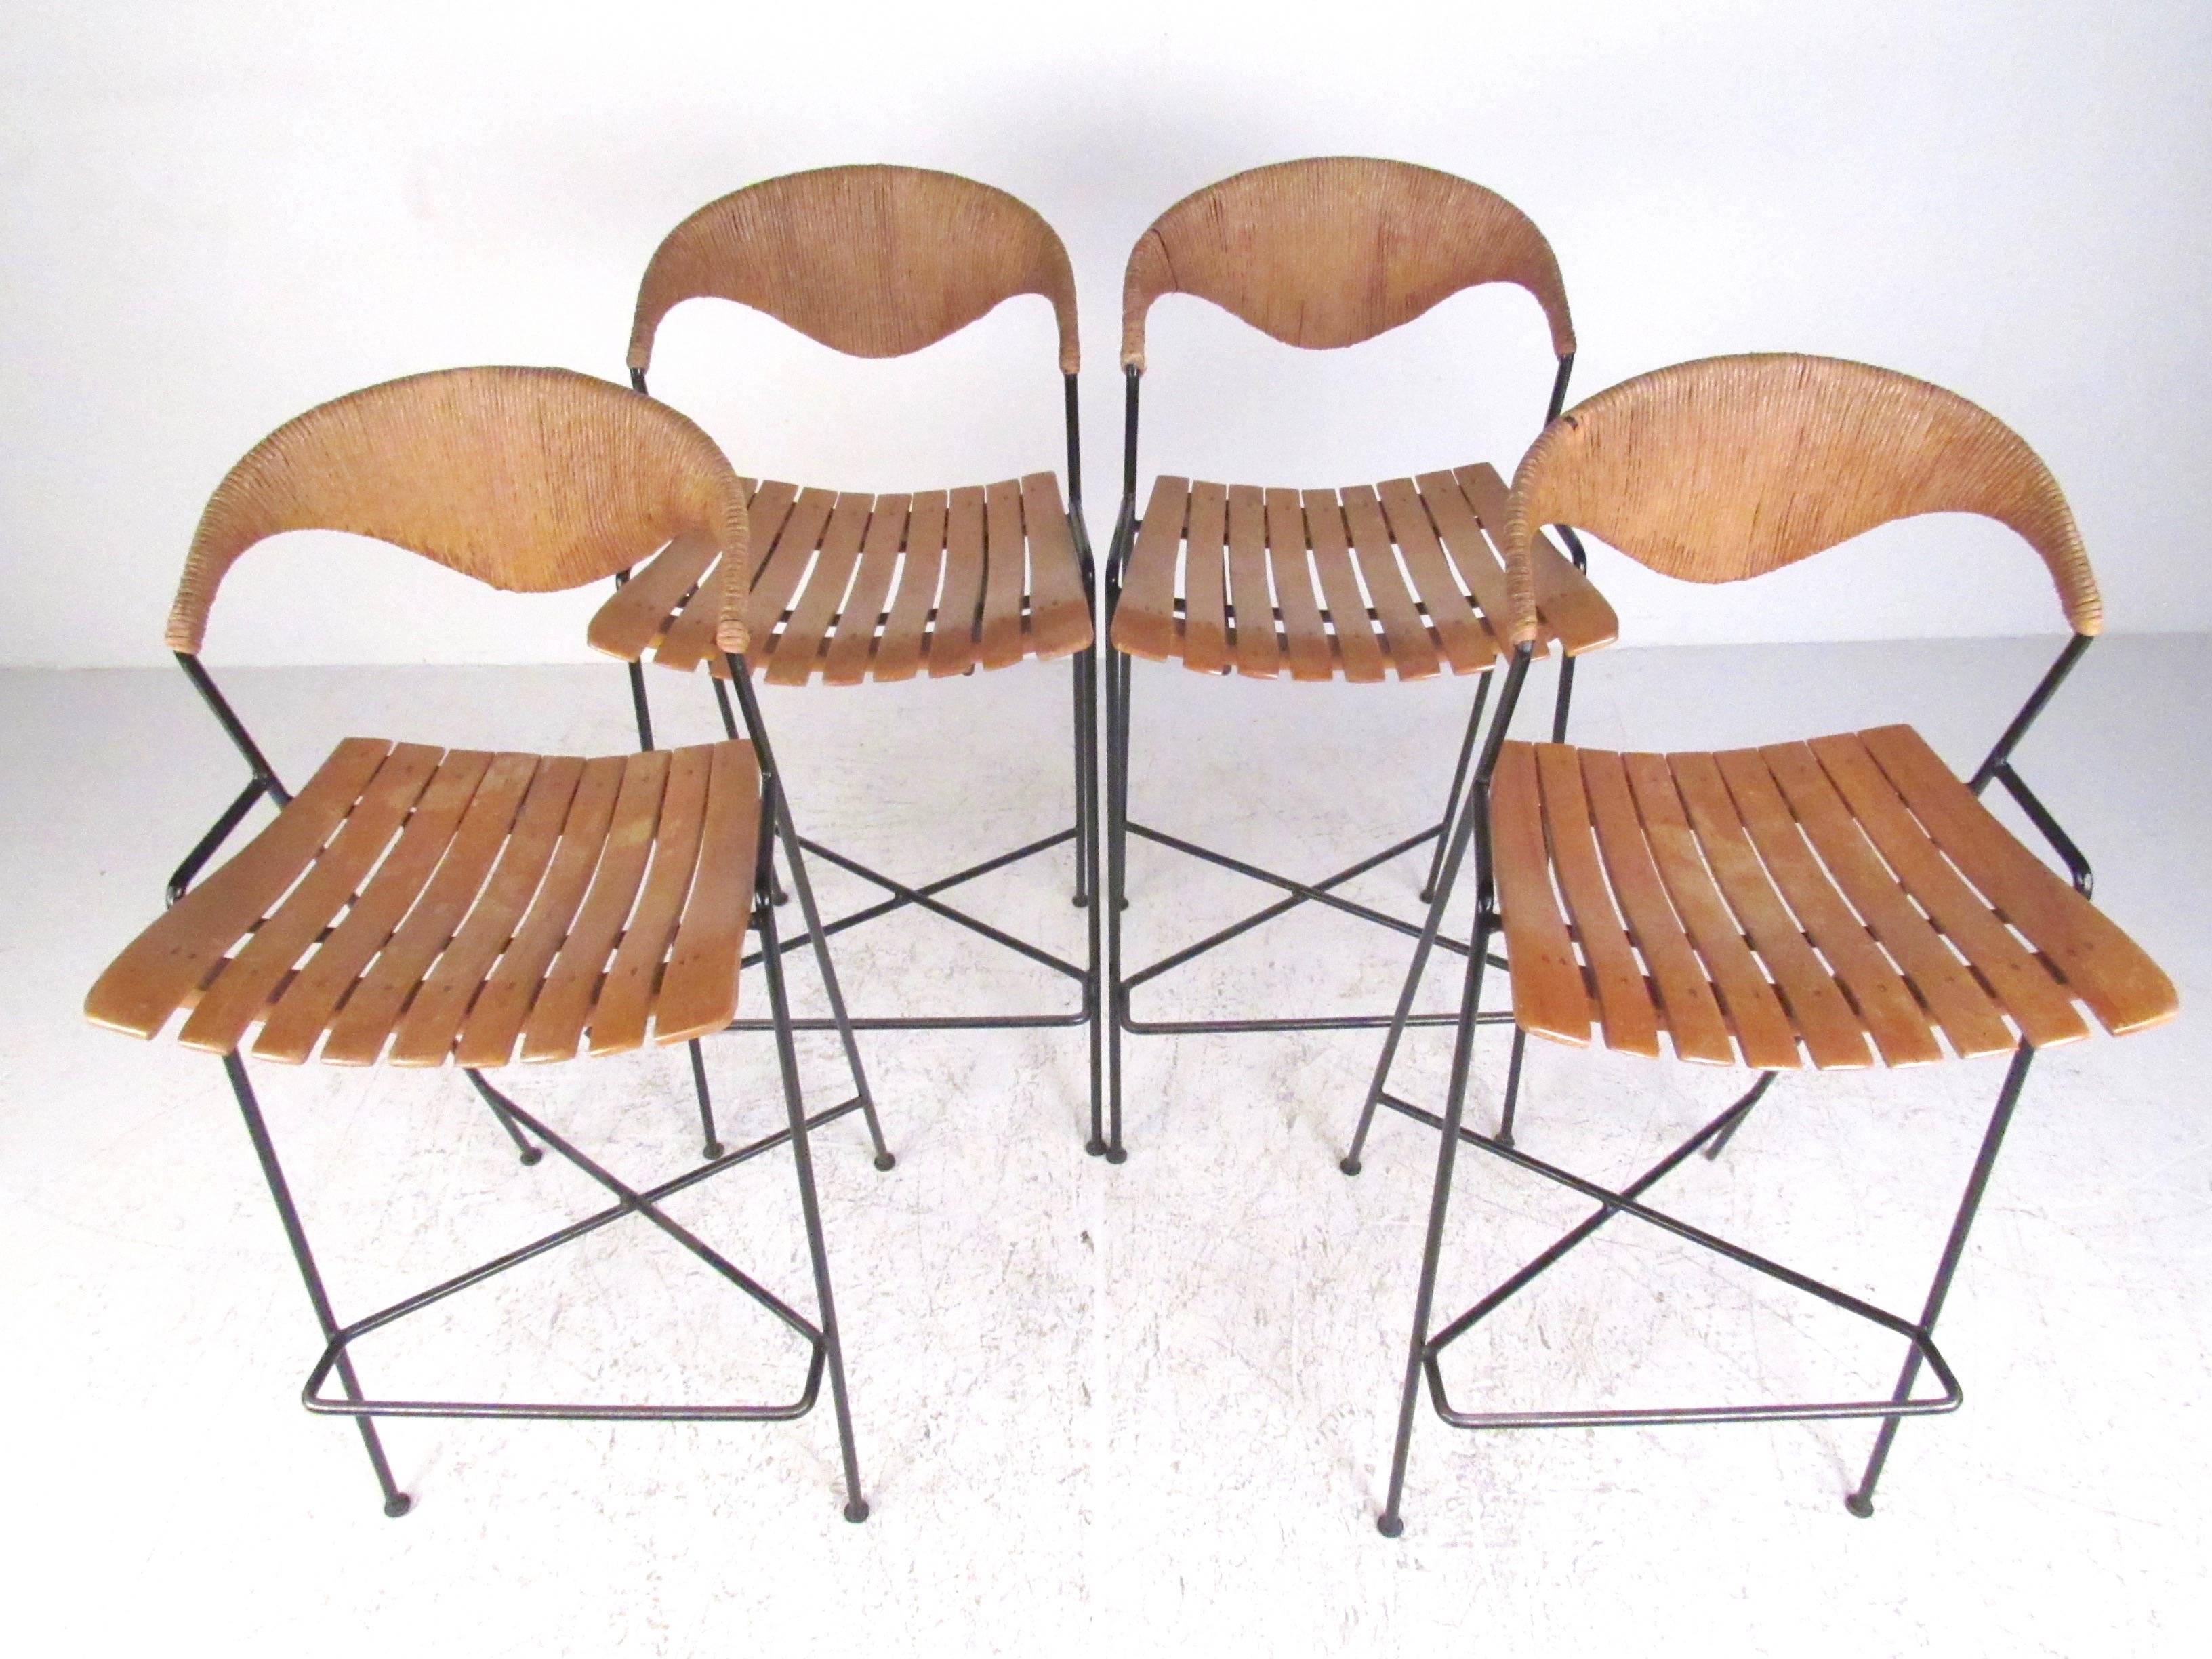 This stylish set of four Mid-Century bar stools feature slat seats and unique rush covered seat backs. Sculptural Arthur Umanoff design combines cast iron frames with natural seating materials for an organic modern appeal. Perfect addition to home